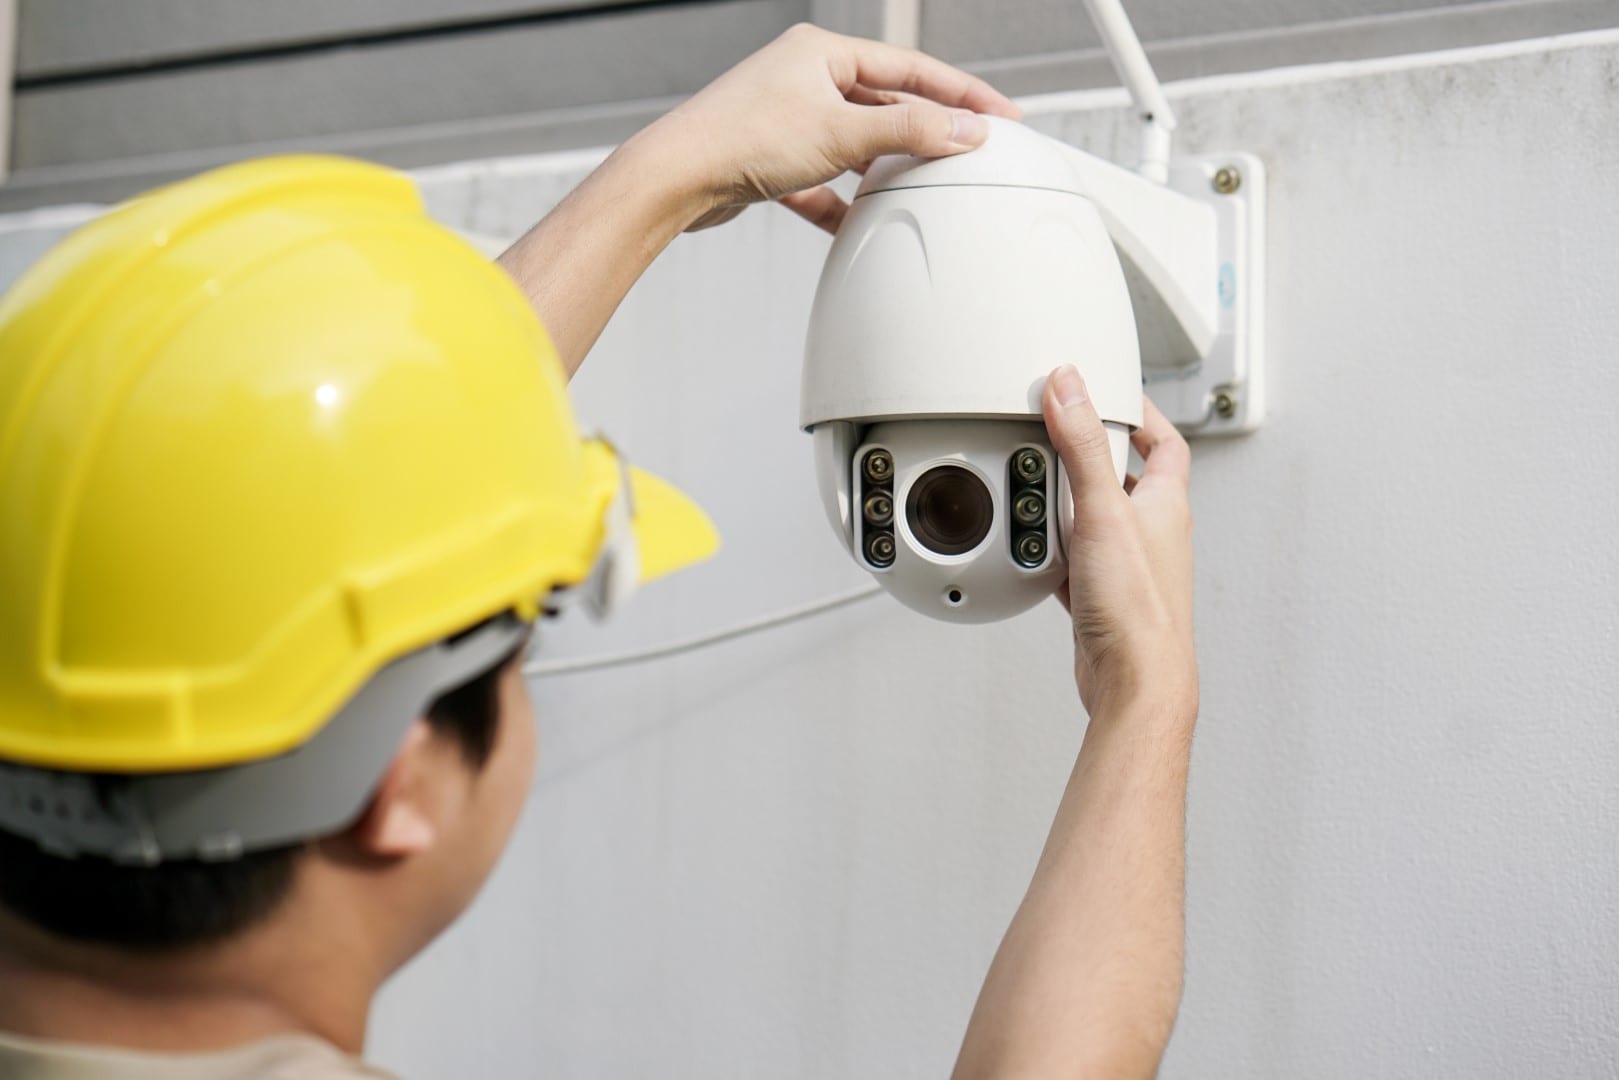 7 Great Benefits of Central Monitoring System